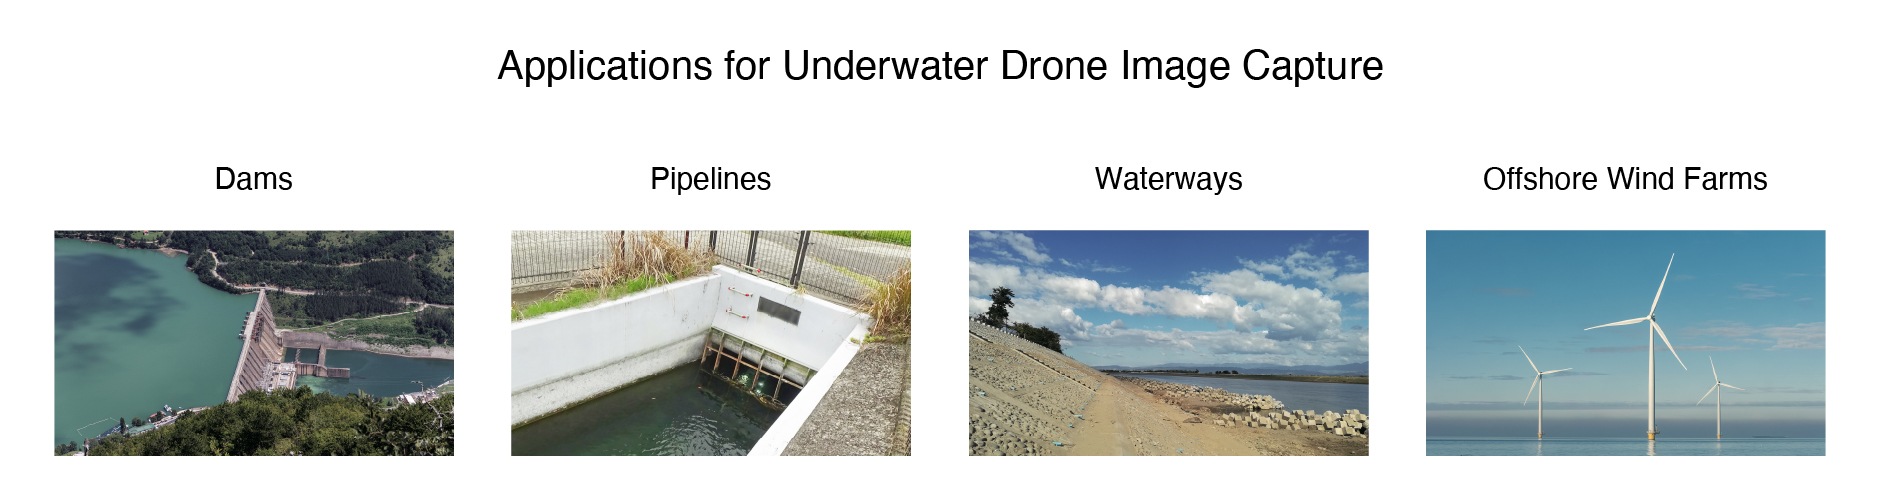 Applications for Underwater Drone Image Capture